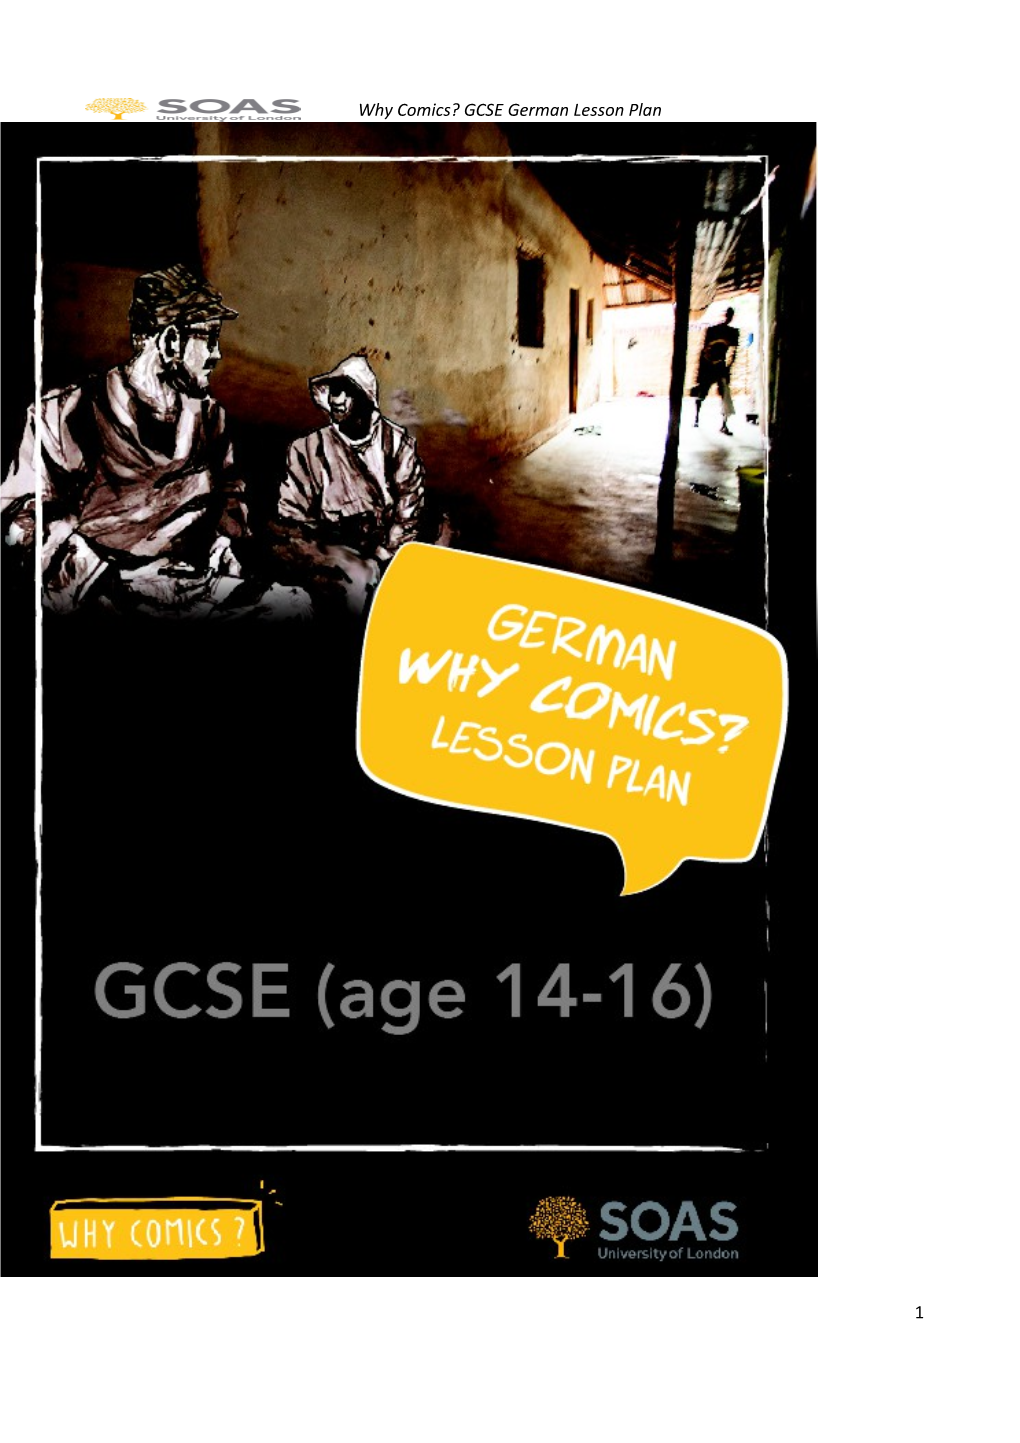 Why Comics? GCSE (Age 14-16) German Lesson Plan: Reading and Writing